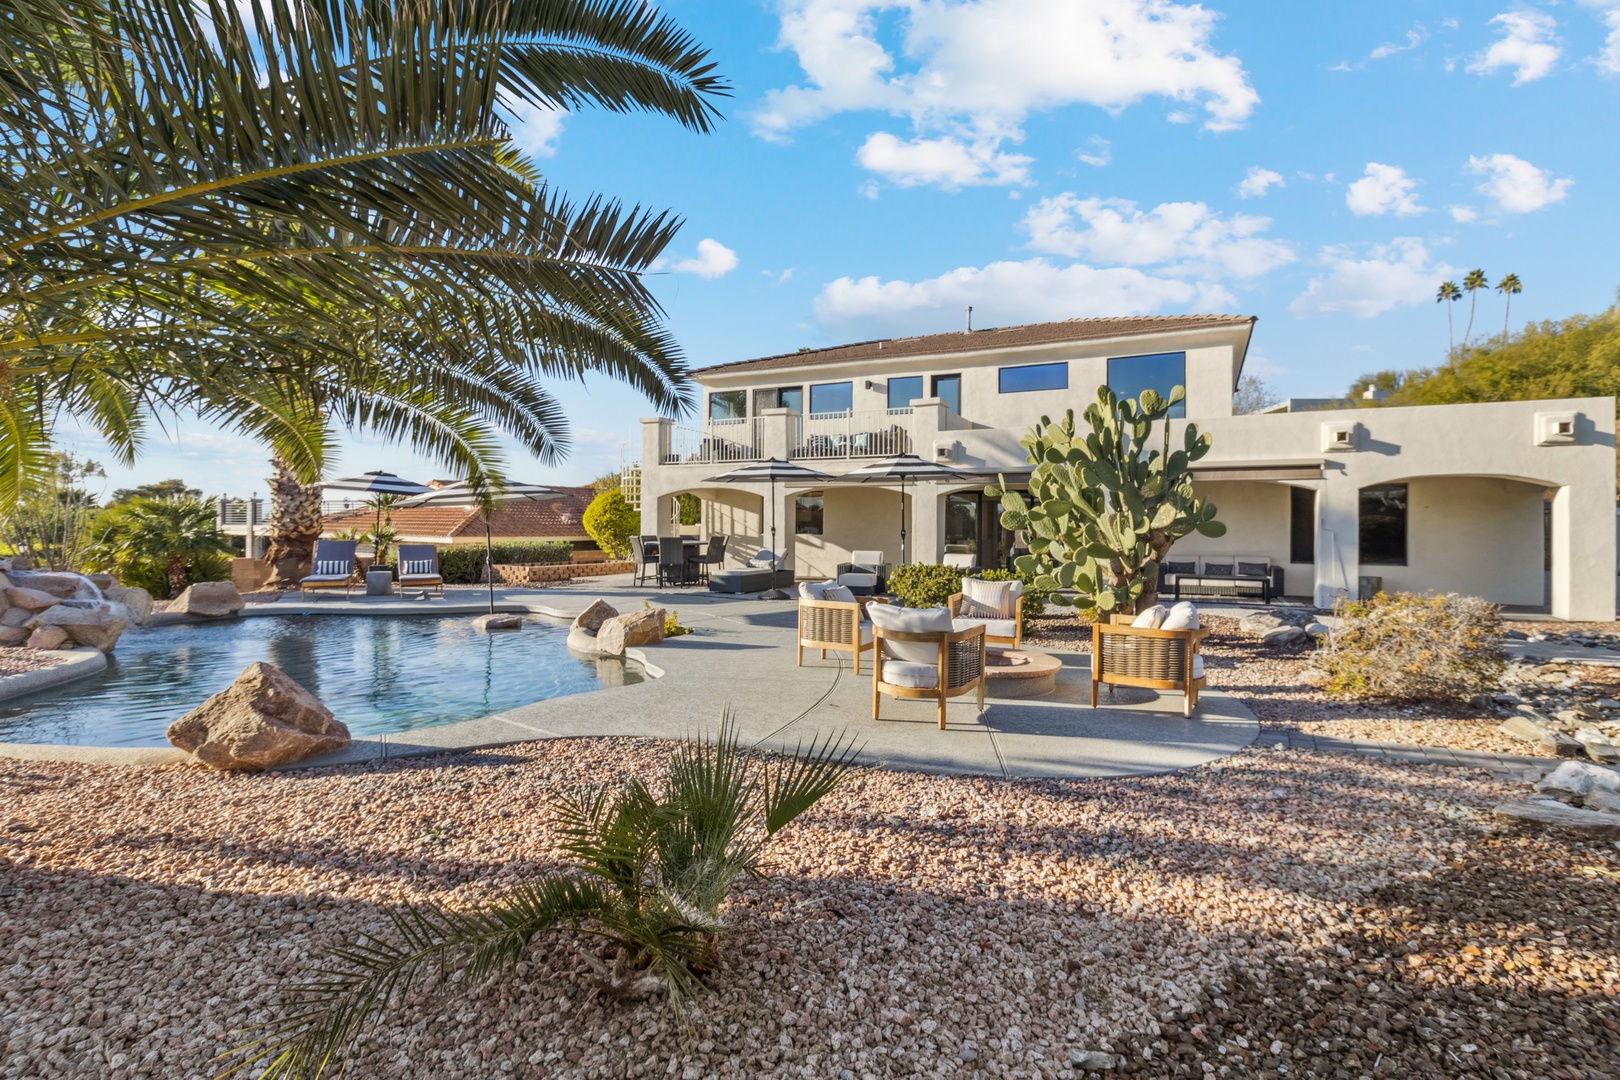 Phoenix Vacation Rentals, Majestic Mountain Views at Piestewa Peak Paradise - View of the entire property